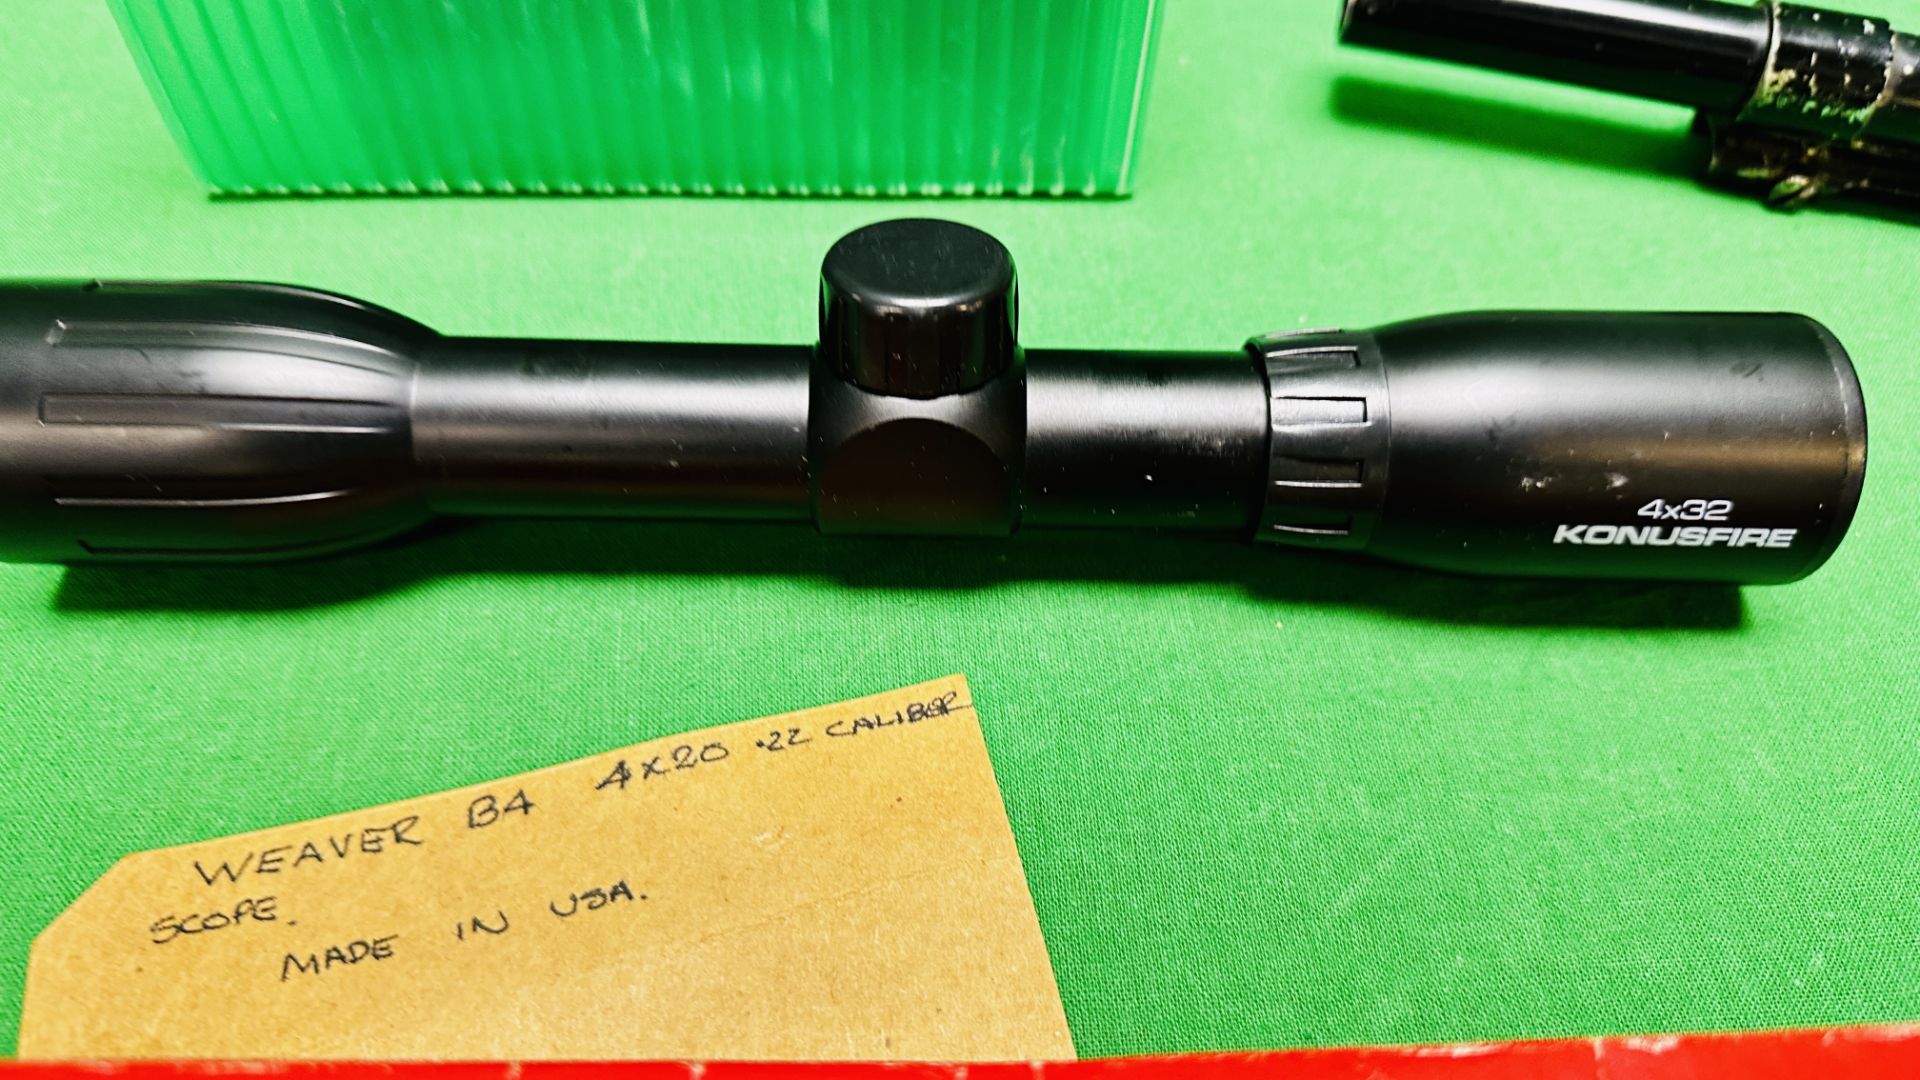 6 X VARIOUS RIFLE SCOPES TO INCLUDE BOXED WEAVER B4 4X20 SCOPE, - Image 4 of 7